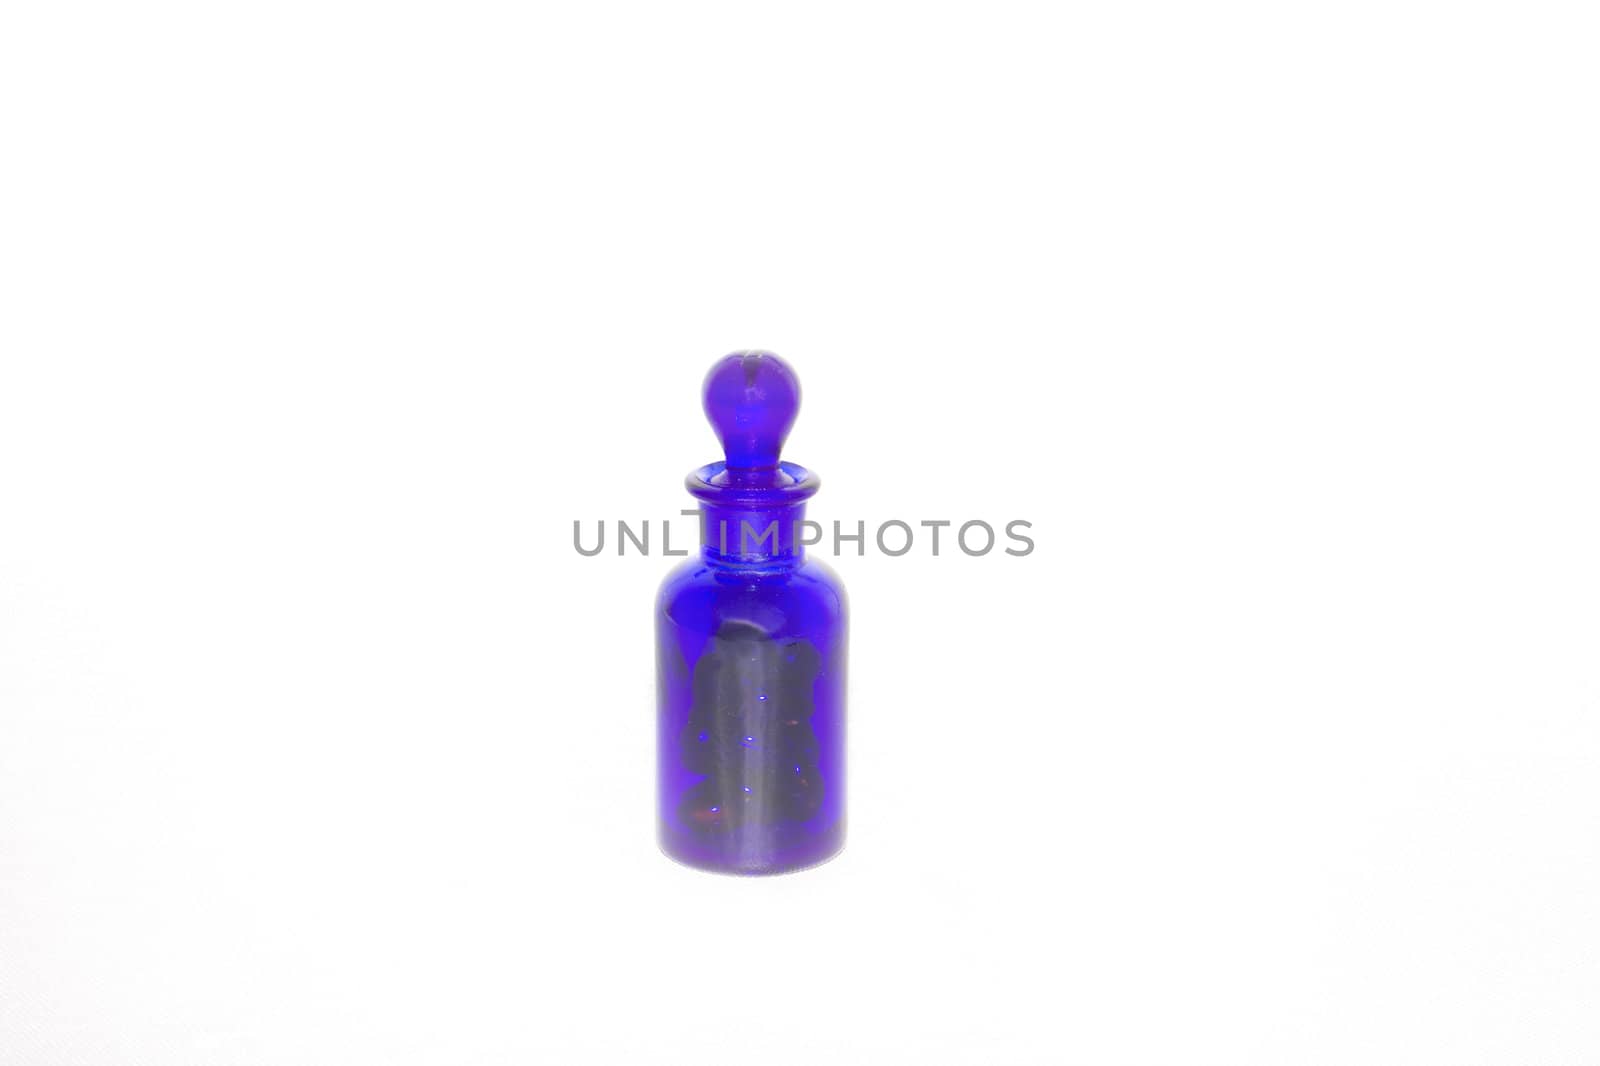 Isoalted Cobalt Blue Vial Bottle with Glass Stopper holding medicine. This type of vial is also used for perfume or essential oils for aroma therapy.